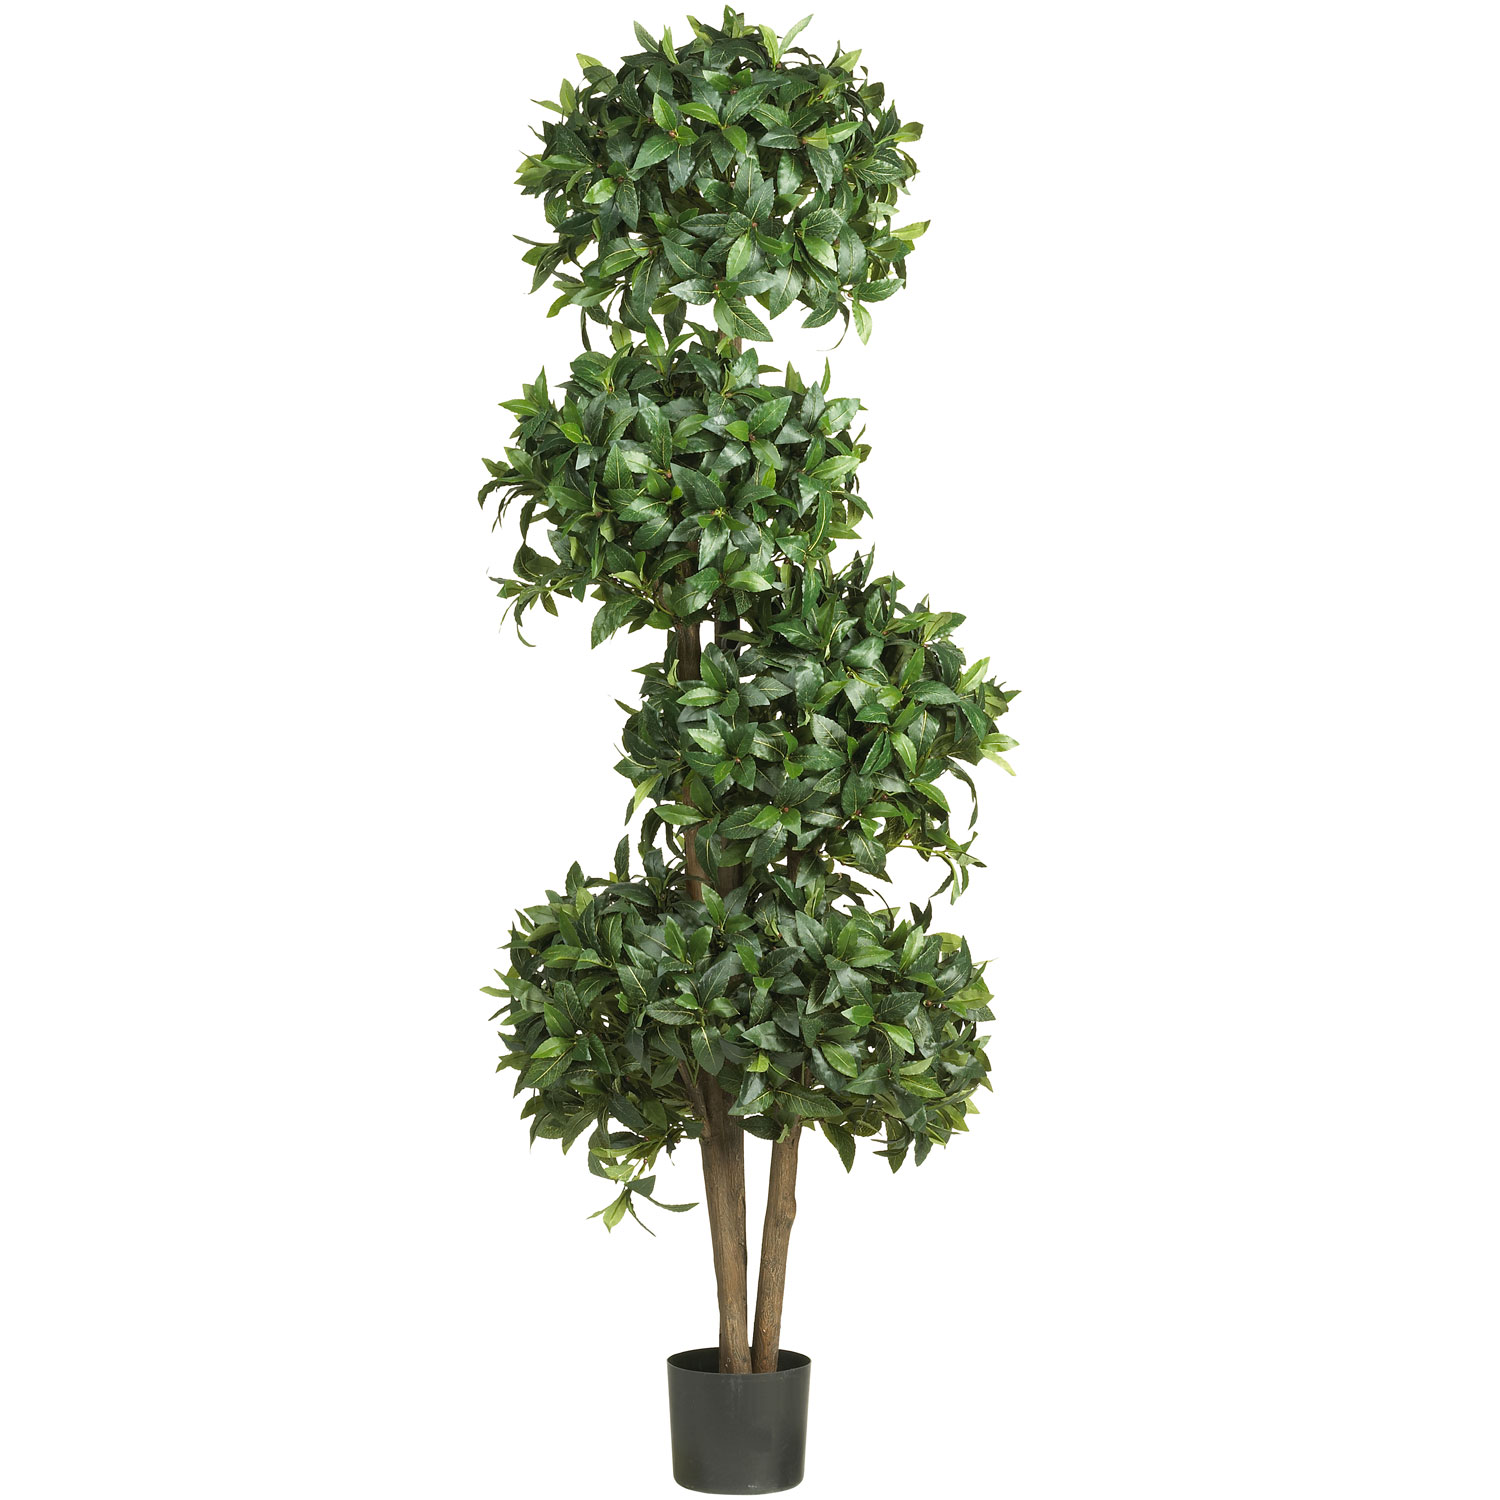 69 Inch Sweet Bay 4 Ball Topiary: Potted